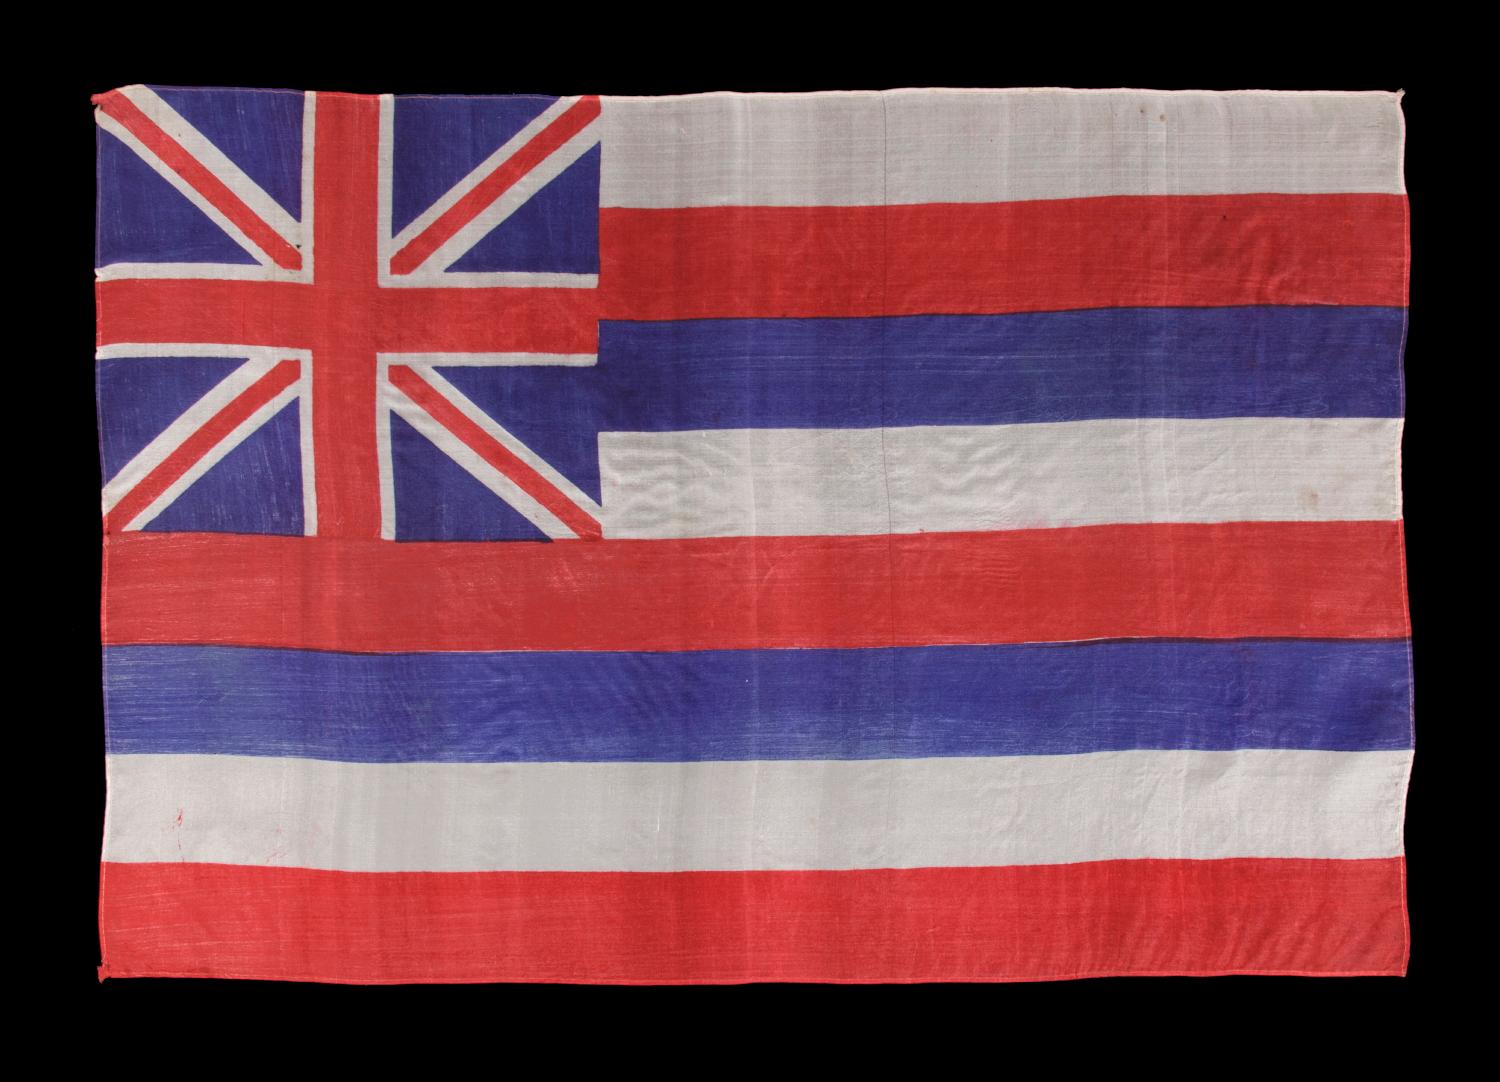 HAWAIIAN PARADE FLAG, CA 1893-1920's, PRE-STATEHOOD, A RARE EXAMPLE IN THIS EARLY PERIOD 

Hawaiian parade flag, printed on silk, made sometime in the period between 1893 and the 1920's. Parade flags were affixed to wooden staffs and intended for